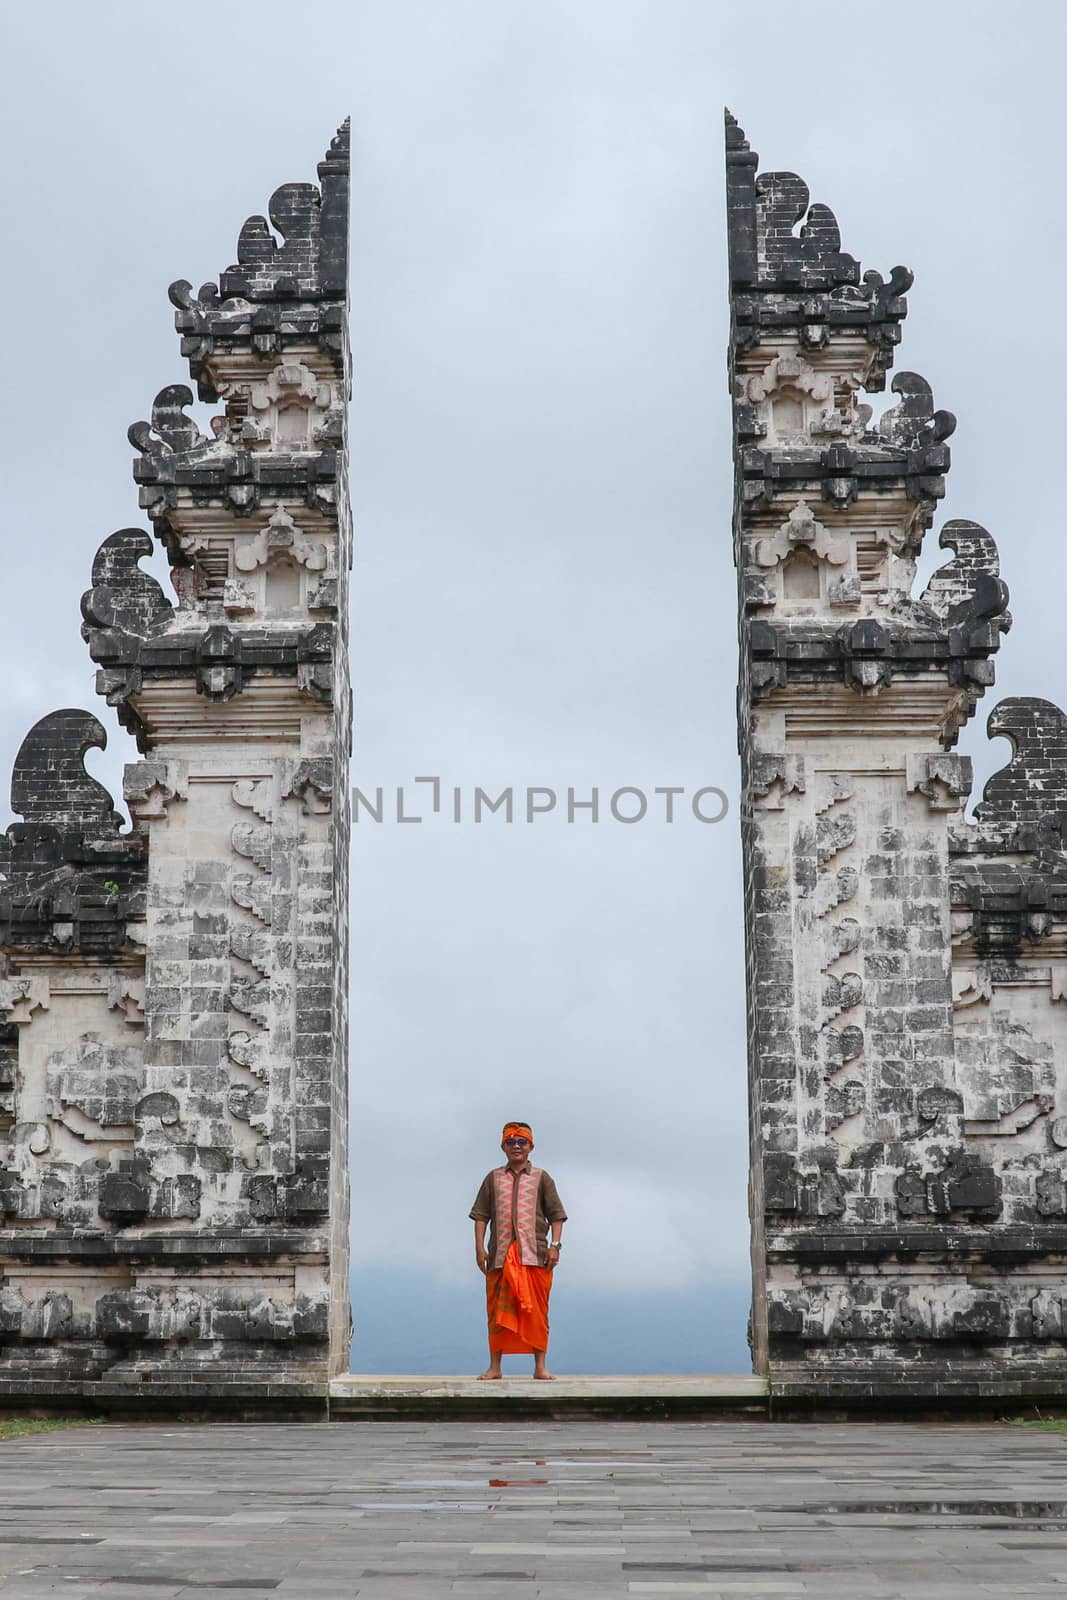 A man in traditional clothes passes through the gate looking back. Ancient gate in Pure Lempuyan, Bali, Indonesia by Sanatana2008